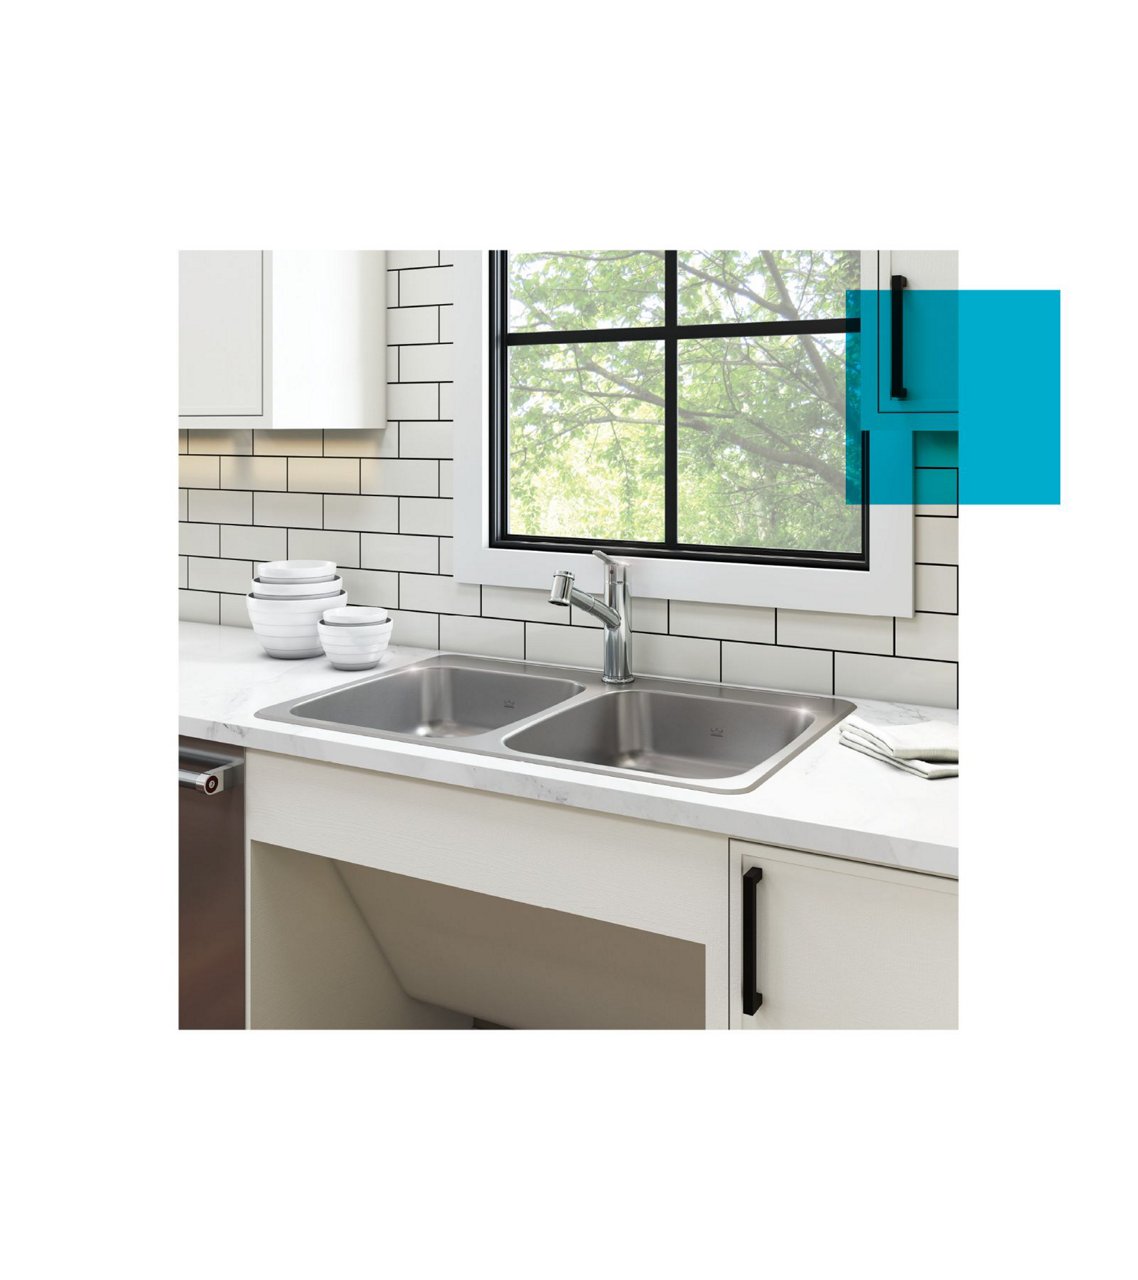 Double bowl ADA kitchen sink with pull out faucet in a bright white accessible kitchen with subway tile.